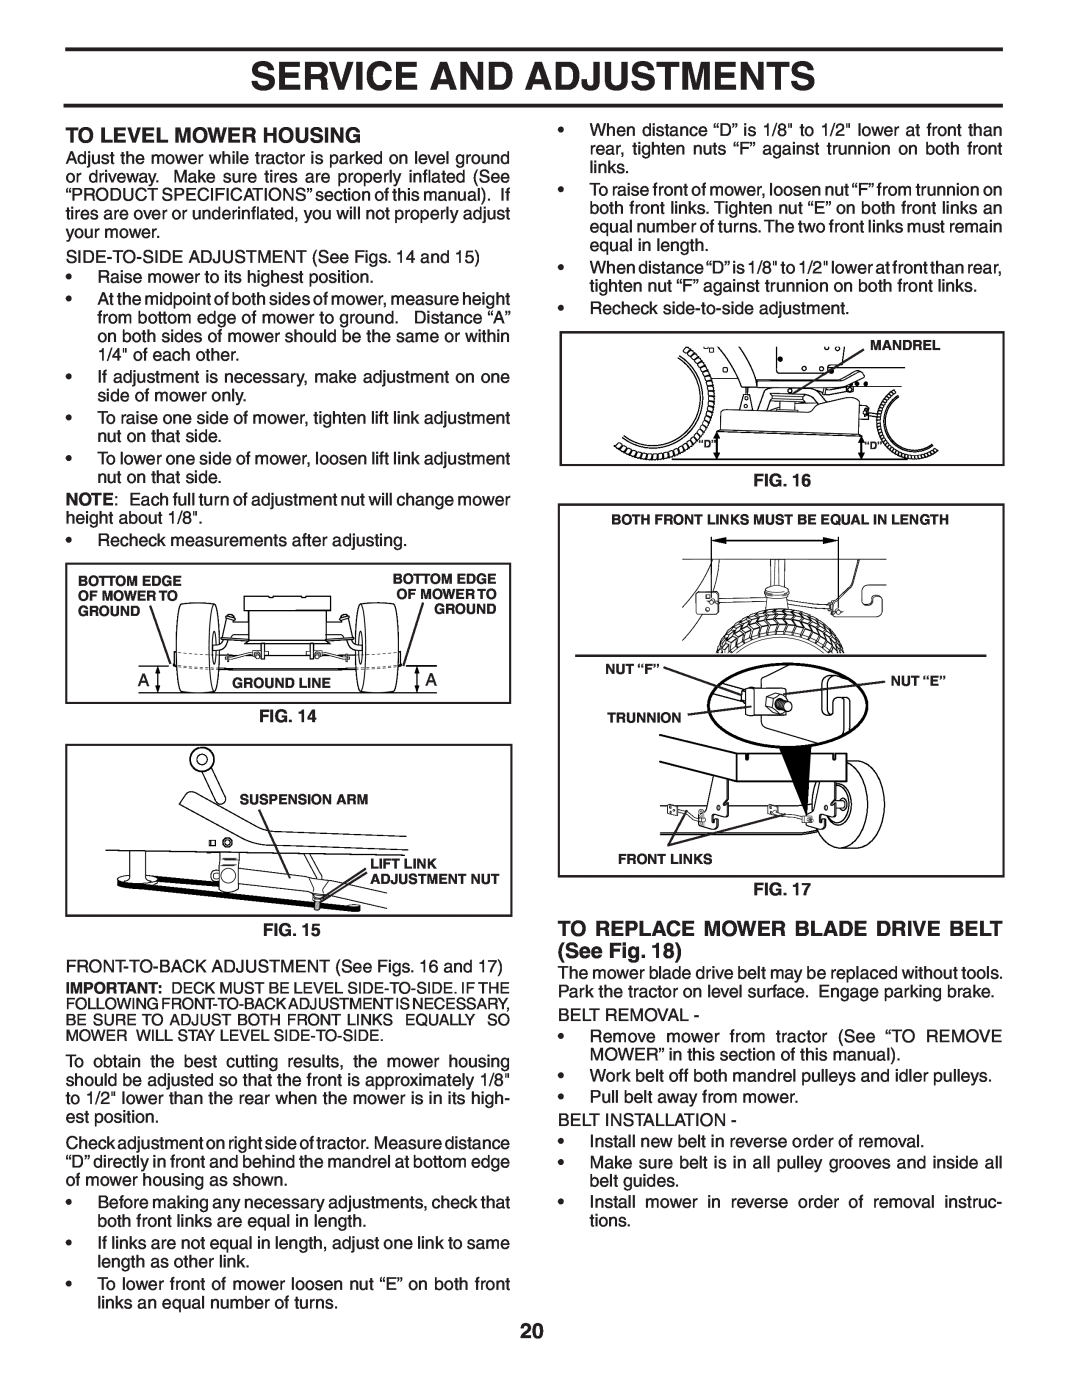 Poulan 403315 manual To Level Mower Housing, TO REPLACE MOWER BLADE DRIVE BELT See Fig, Service And Adjustments 